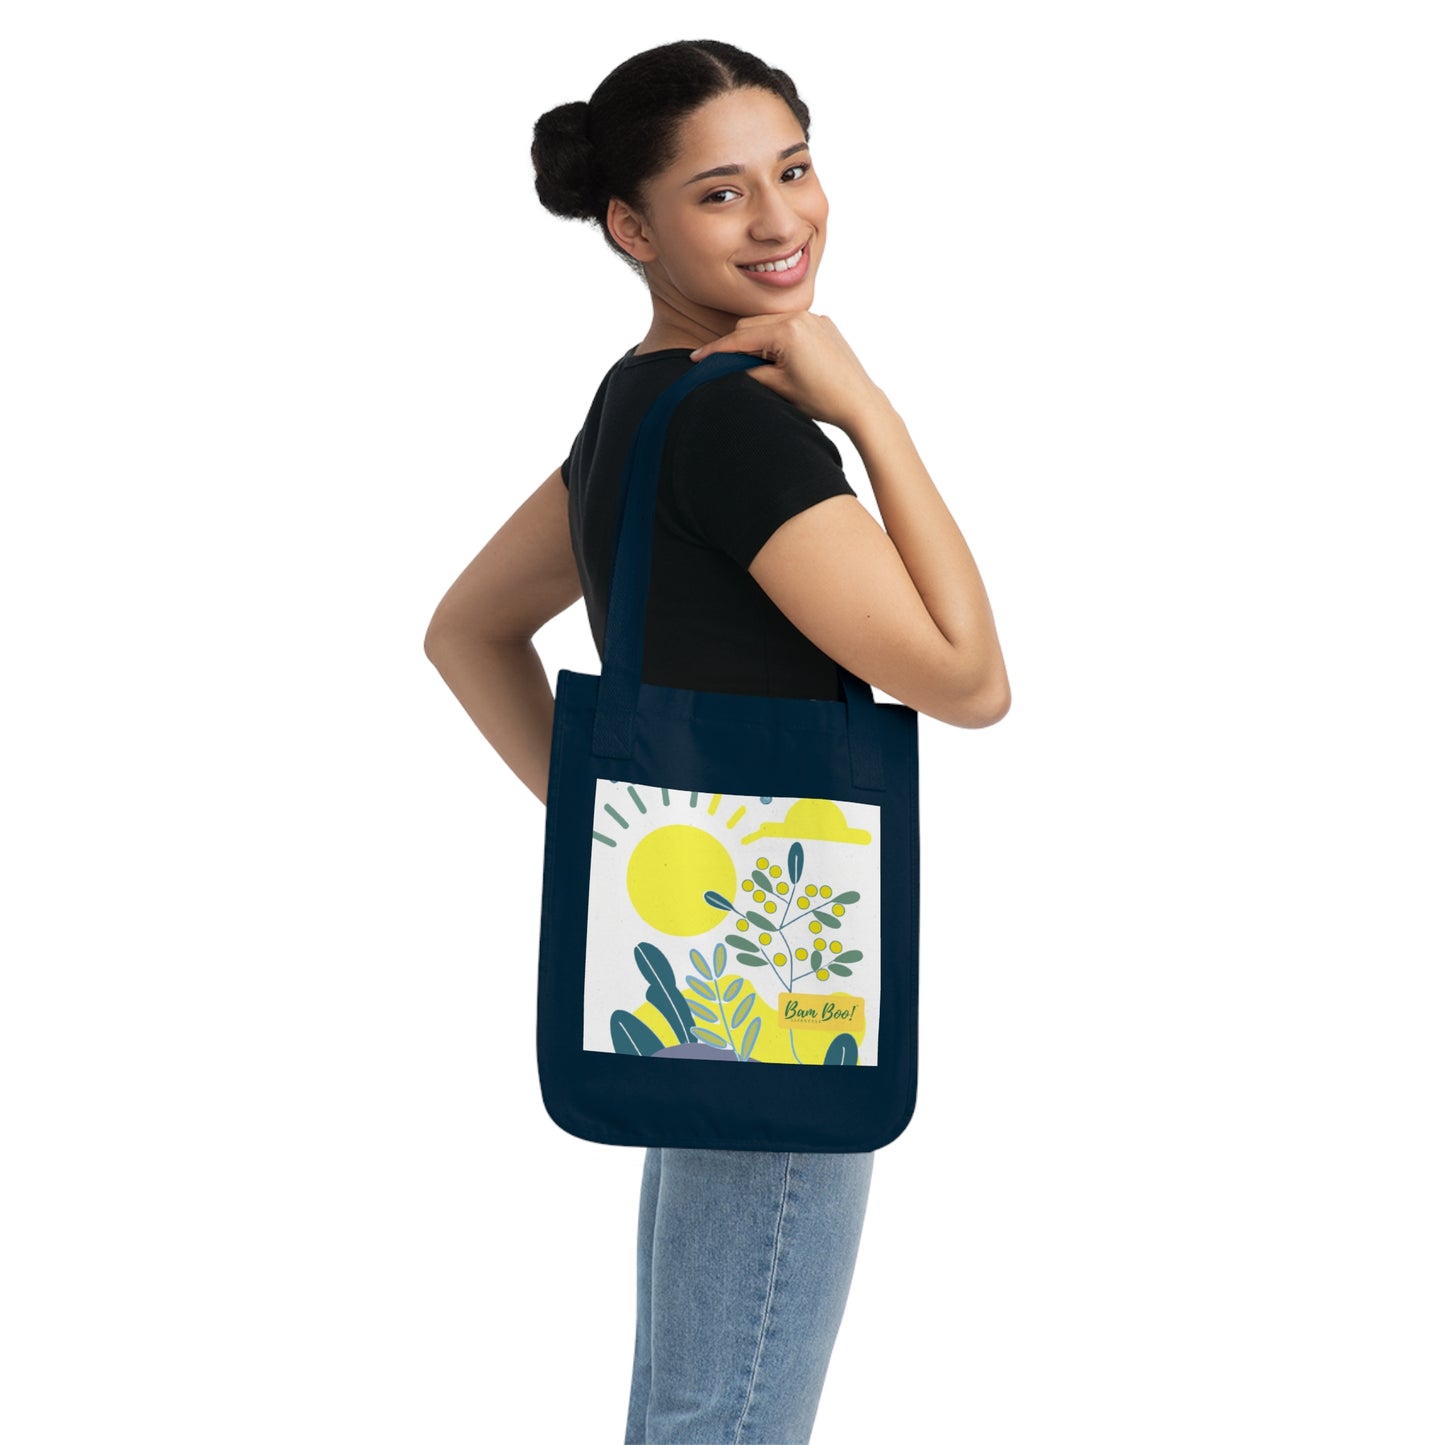 "Abstract Landscape Portrait: A Fusion of Color and Nature" - Bam Boo! Lifestyle Eco-friendly Tote Bag